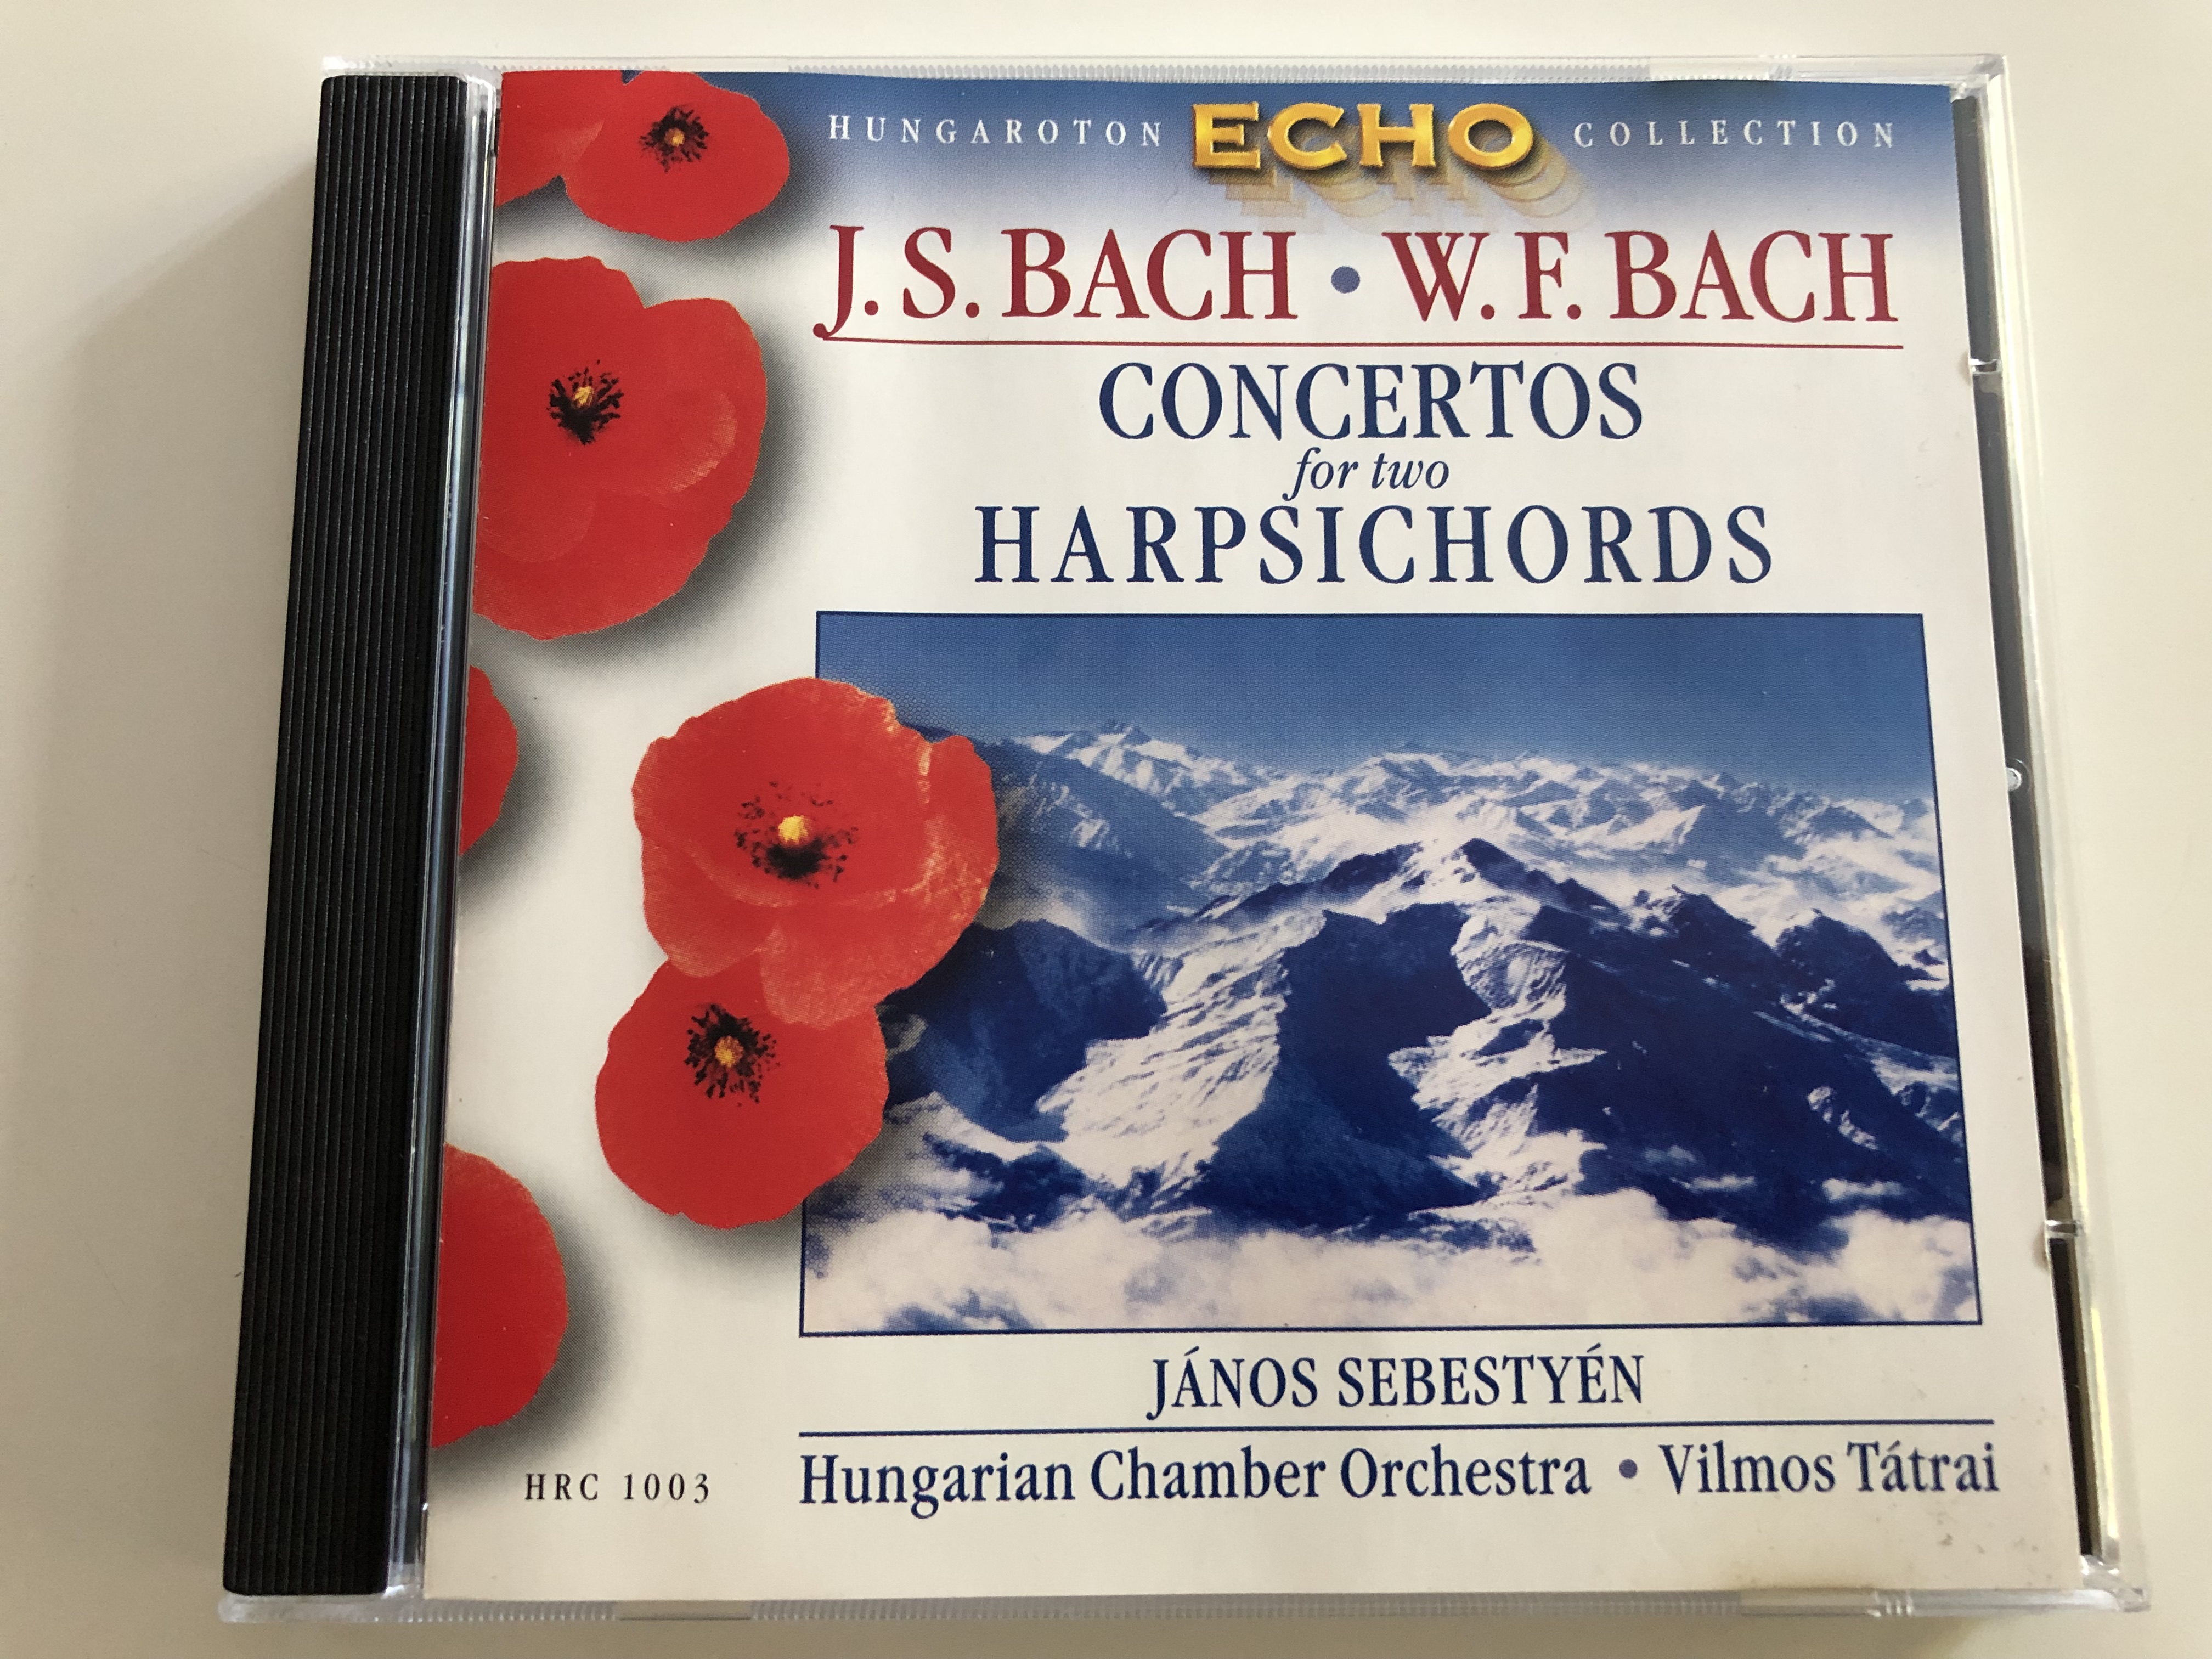 j.s.-bach-w.f.-bach-concertos-for-two-harpsichords-hungaroton-echo-collection-audio-cd-1999-j-nos-sebesty-n-harpsichord-hungarian-chamber-orchestra-conducted-by-vilmos-t-trai-hrc-1003-1-.jpg